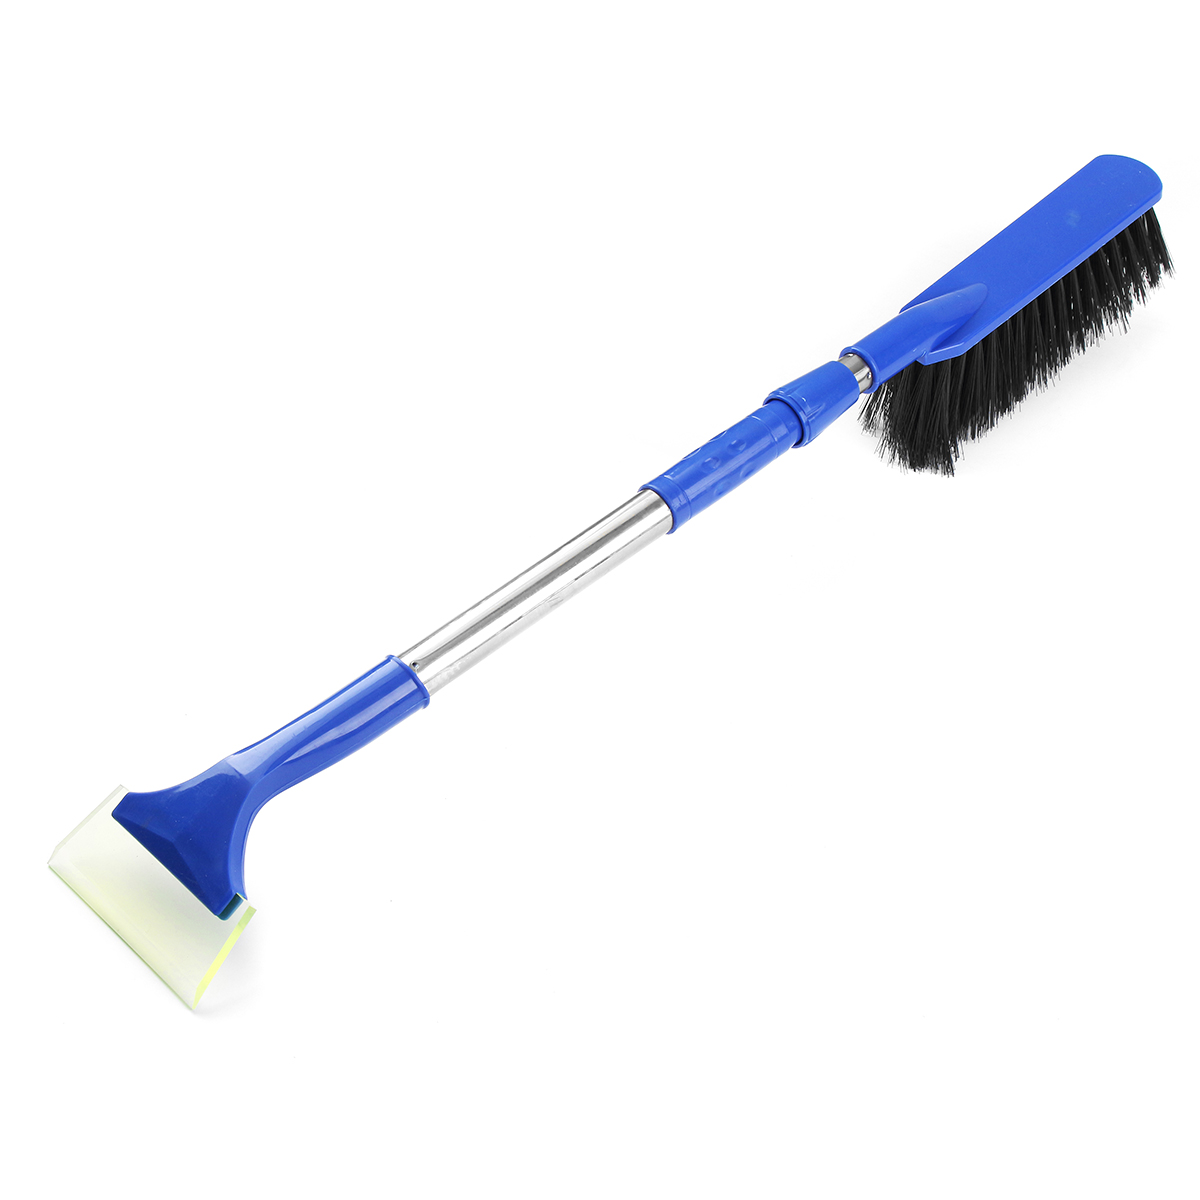 2-in-1-Retractable-Snow-Brush-with-Ice-Scraper-Snow-Removaling-Shovel-Tools-1275566-3